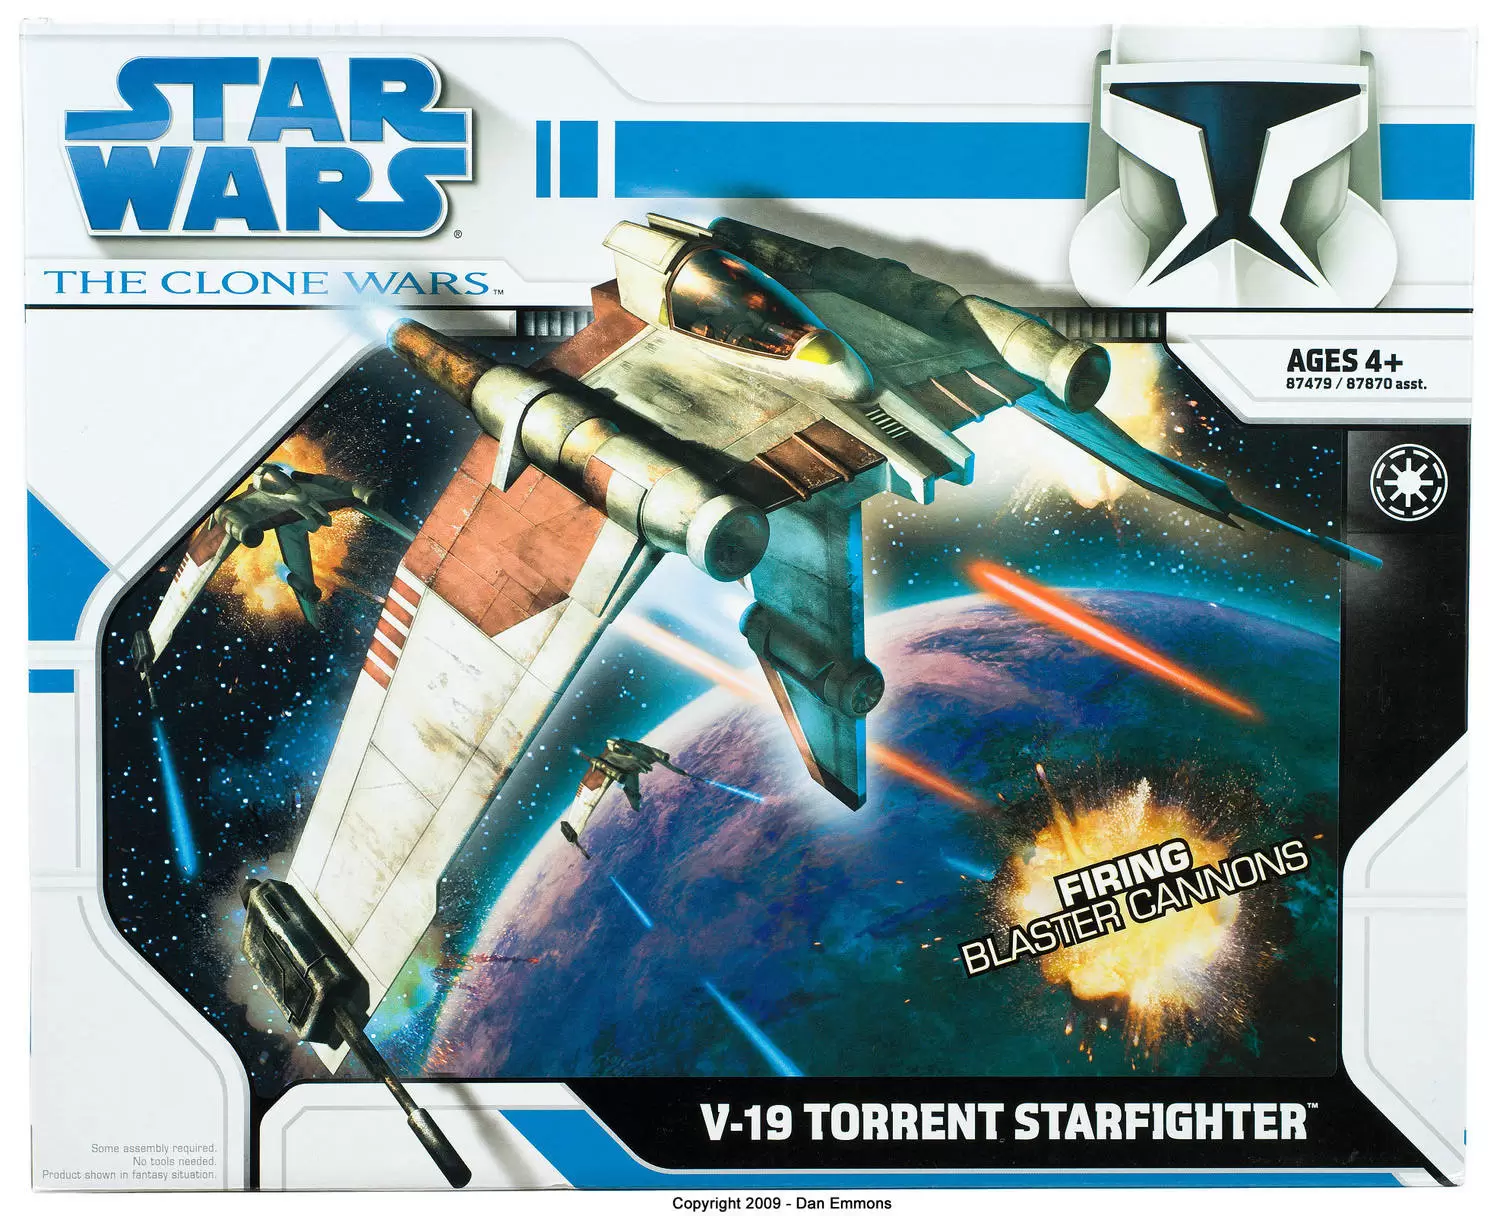 The Clone Wars (TCW 2008) - V-19 Torrent Starfighter